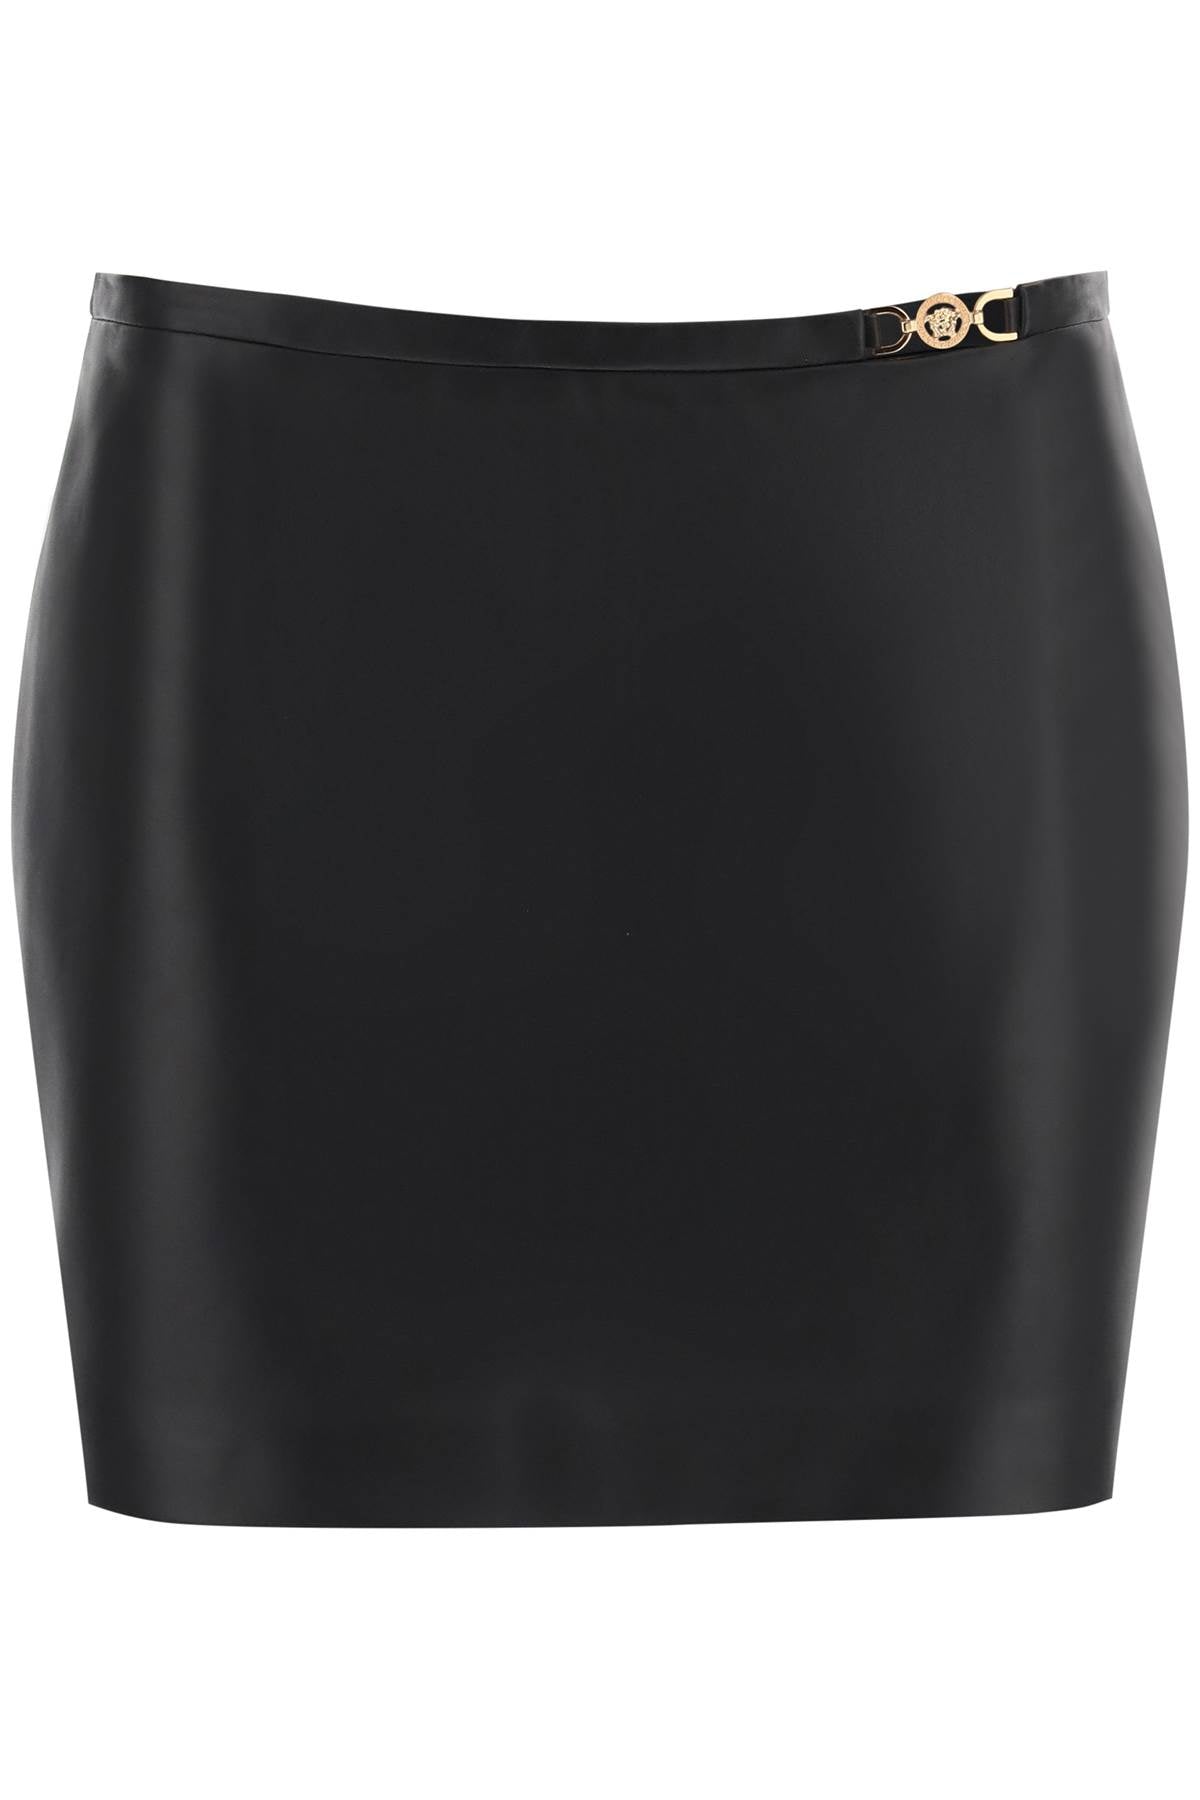 VERSACE Statement-Making Leather Mini Skirt for Women in Classic Black